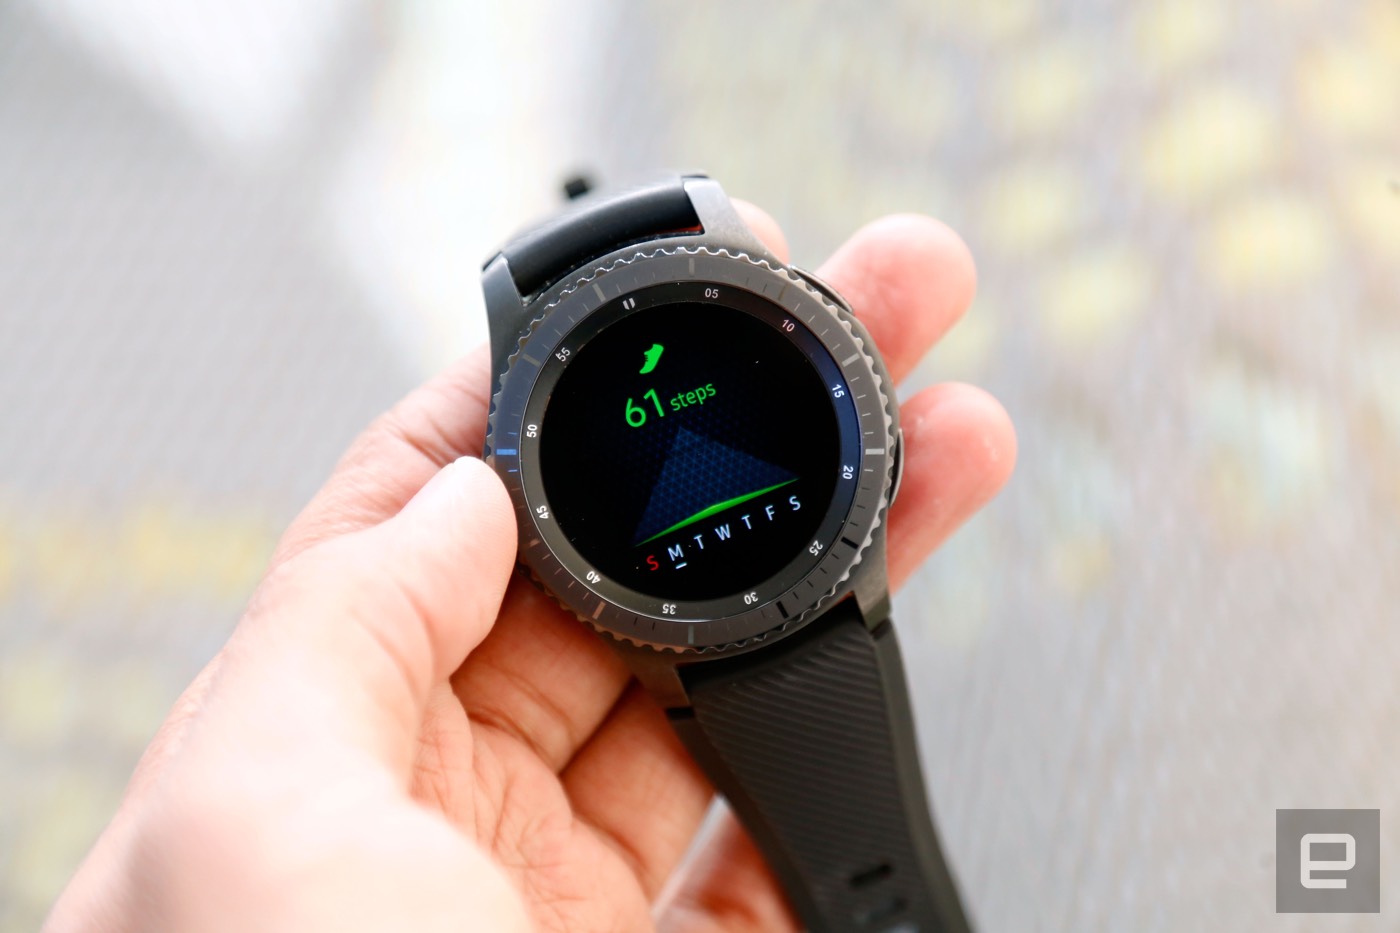 galaxy s3 watch features